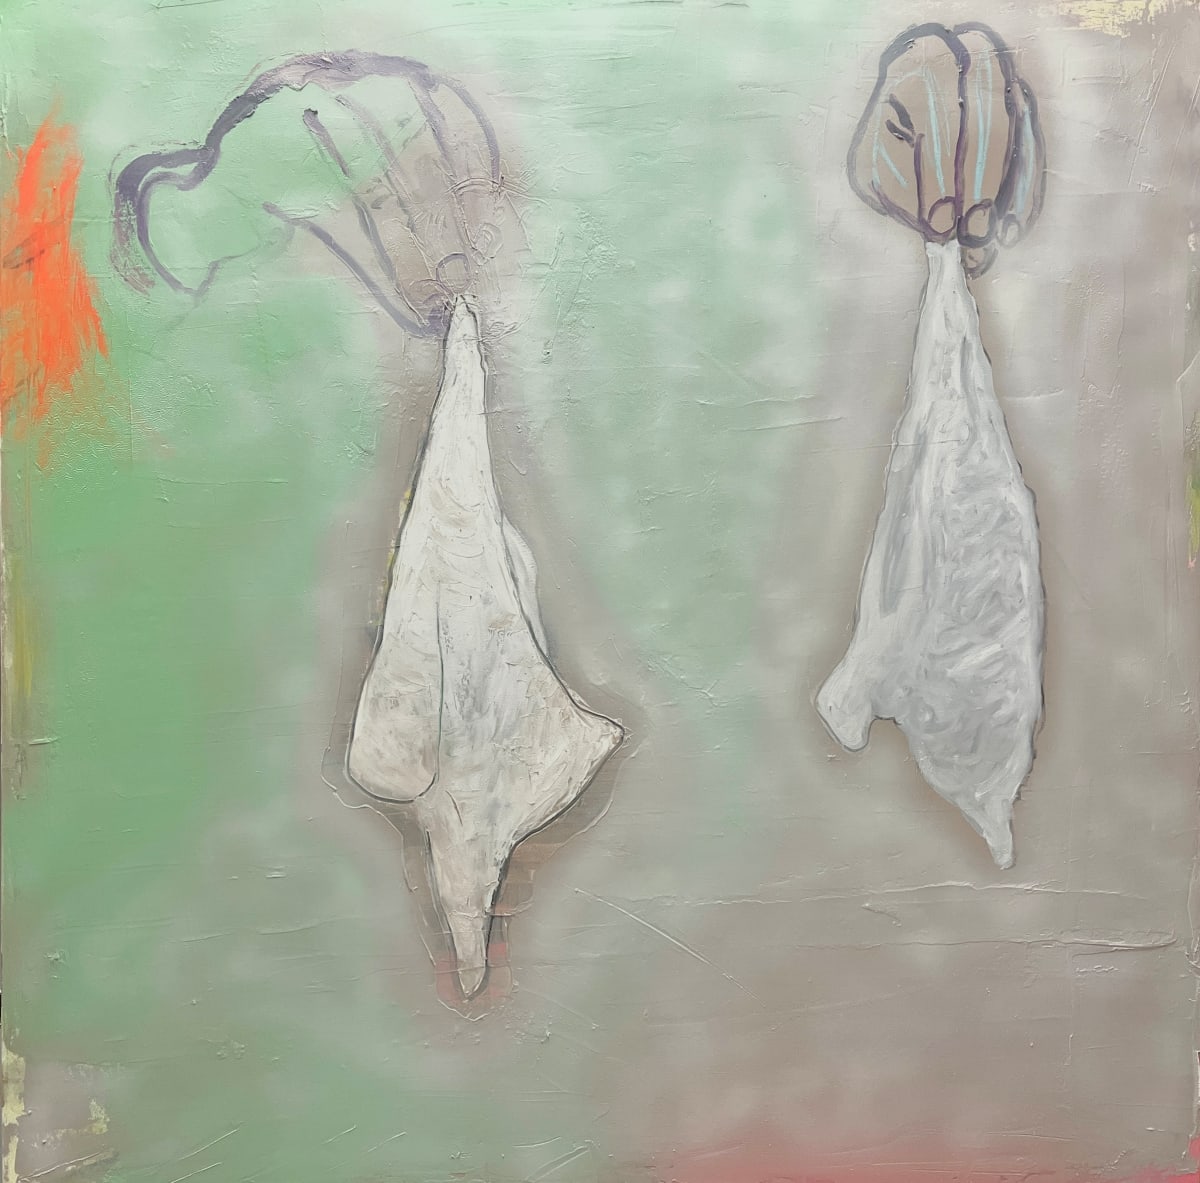 The One Is For Snot The Other For Tears  (Handkerchief study) by Borg de Nobel 